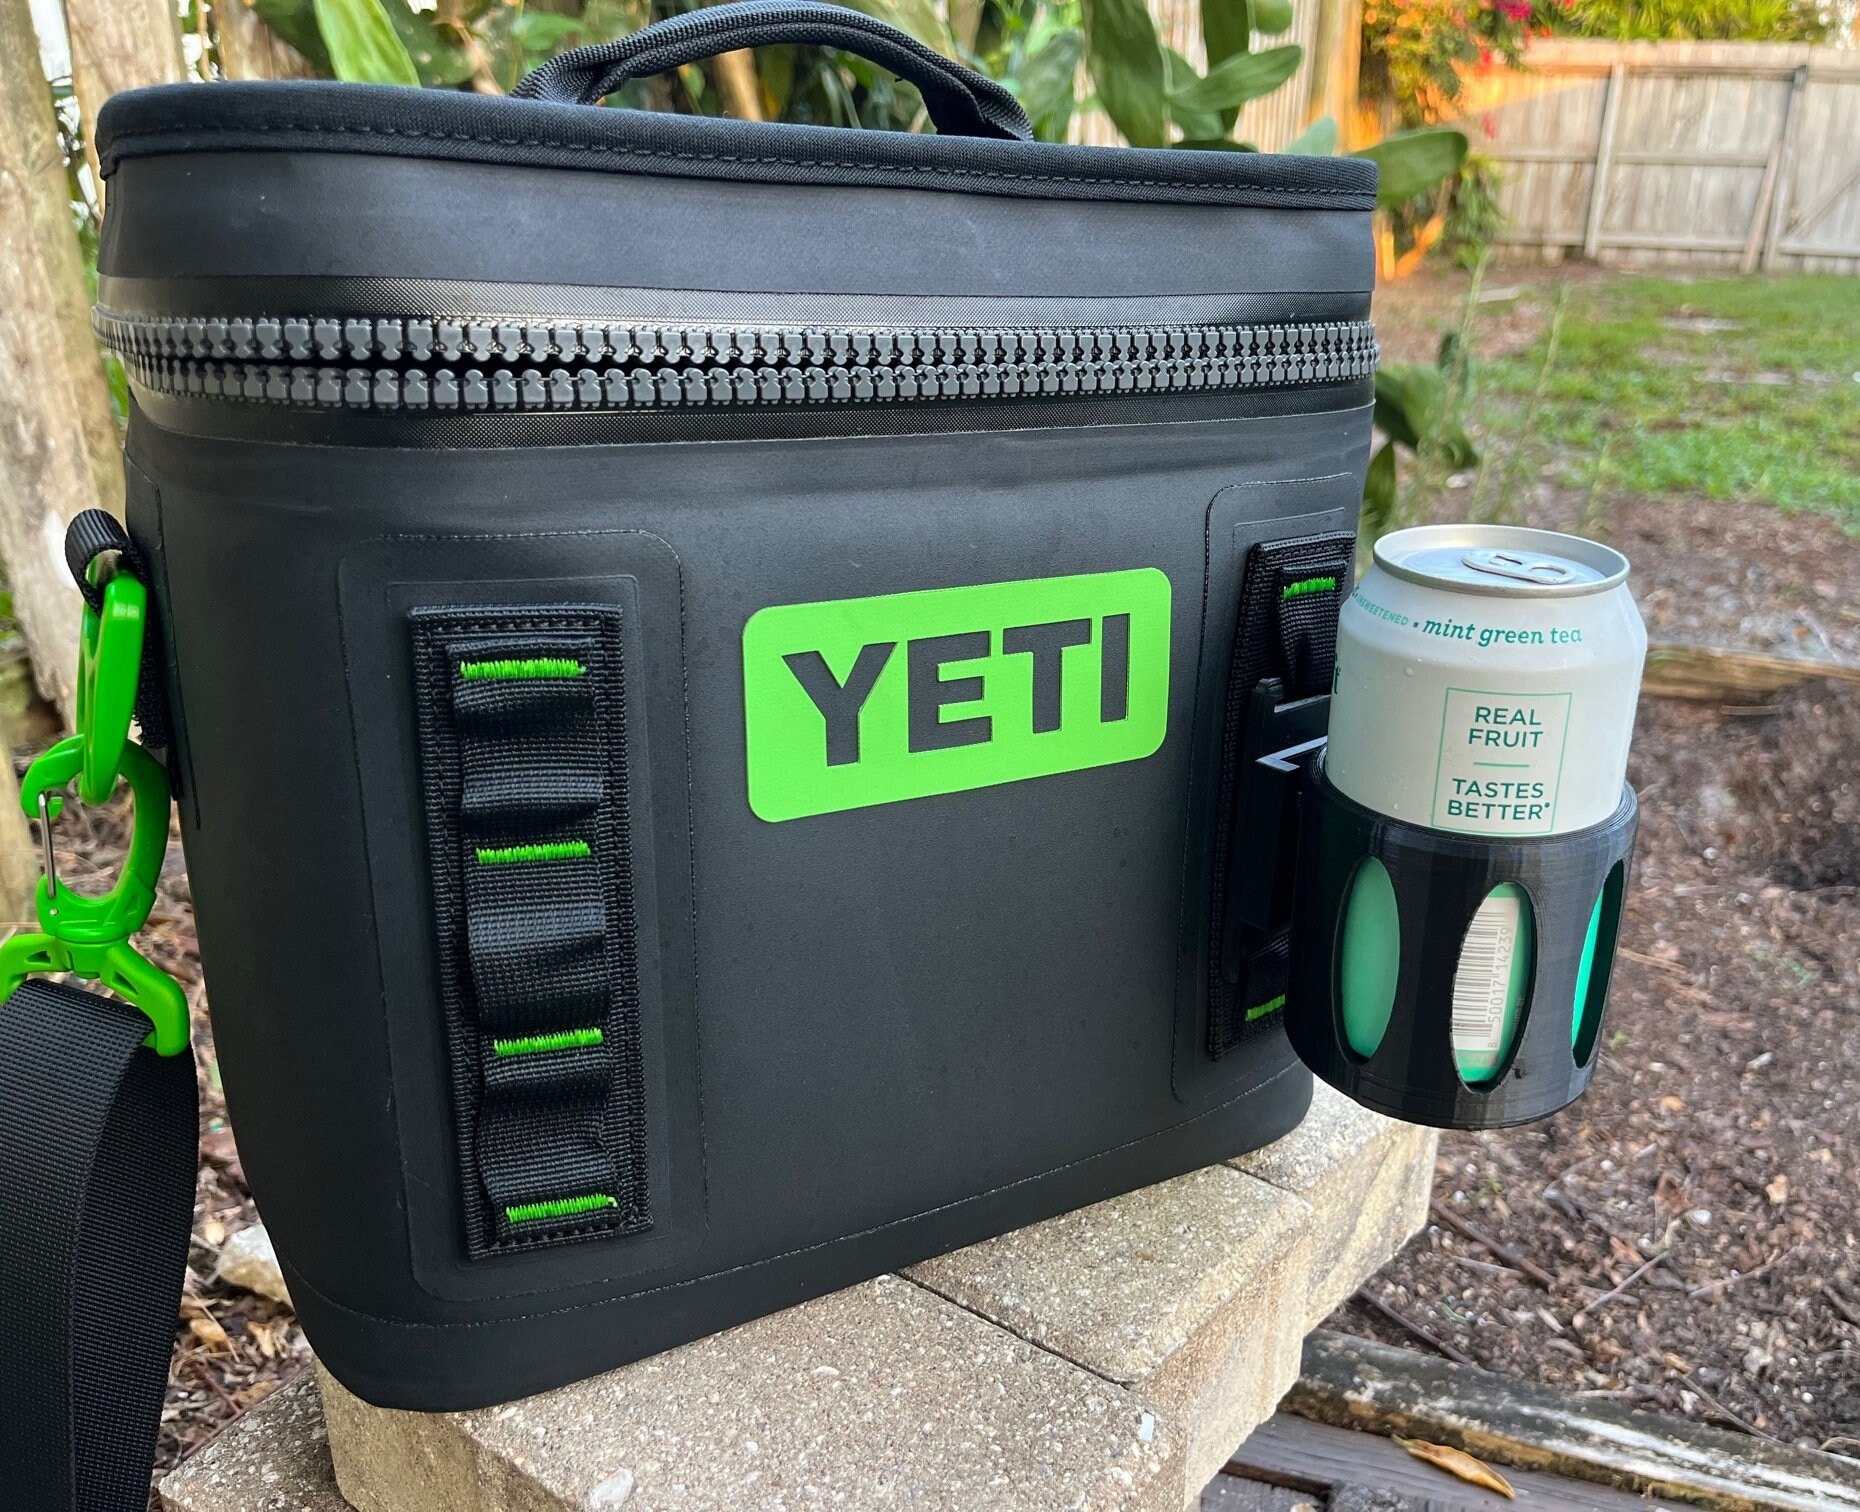 Yeti Cooler Accessory Cup Holder for Yeti Cooler Drink Holder Yeti